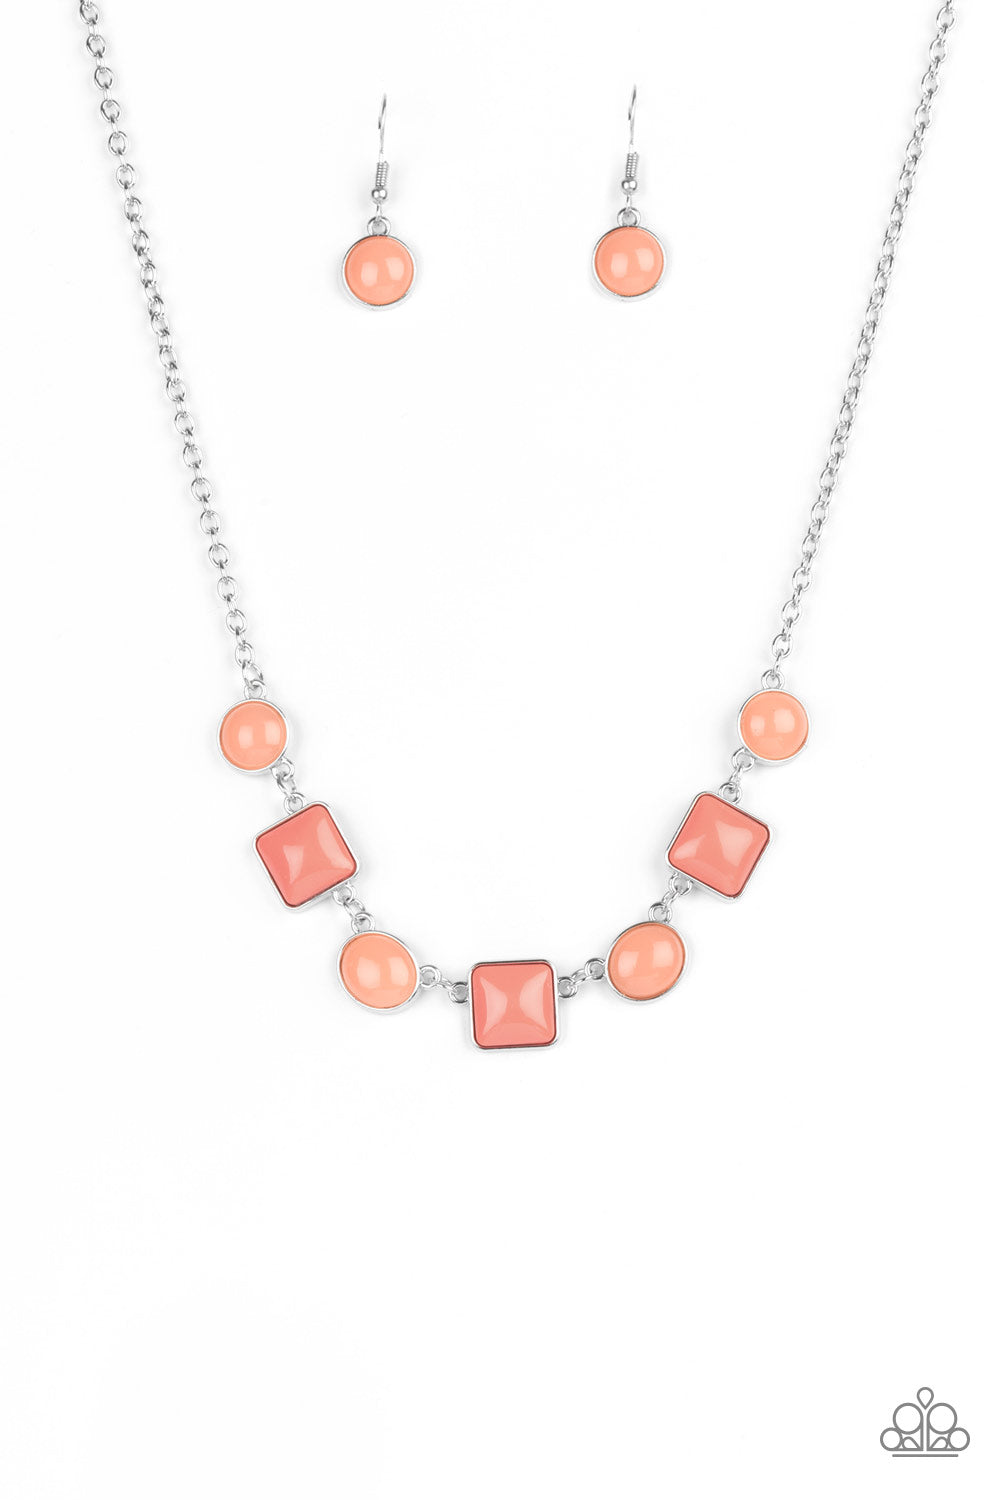 Paparazzi Accessories necklace - Burnt Coral beads in varying opacities are pressed into simple silver frames. The square and round shapes link across the collar on a silver chain for a dainty trend worthy display. Features an adjustable clasp closure.